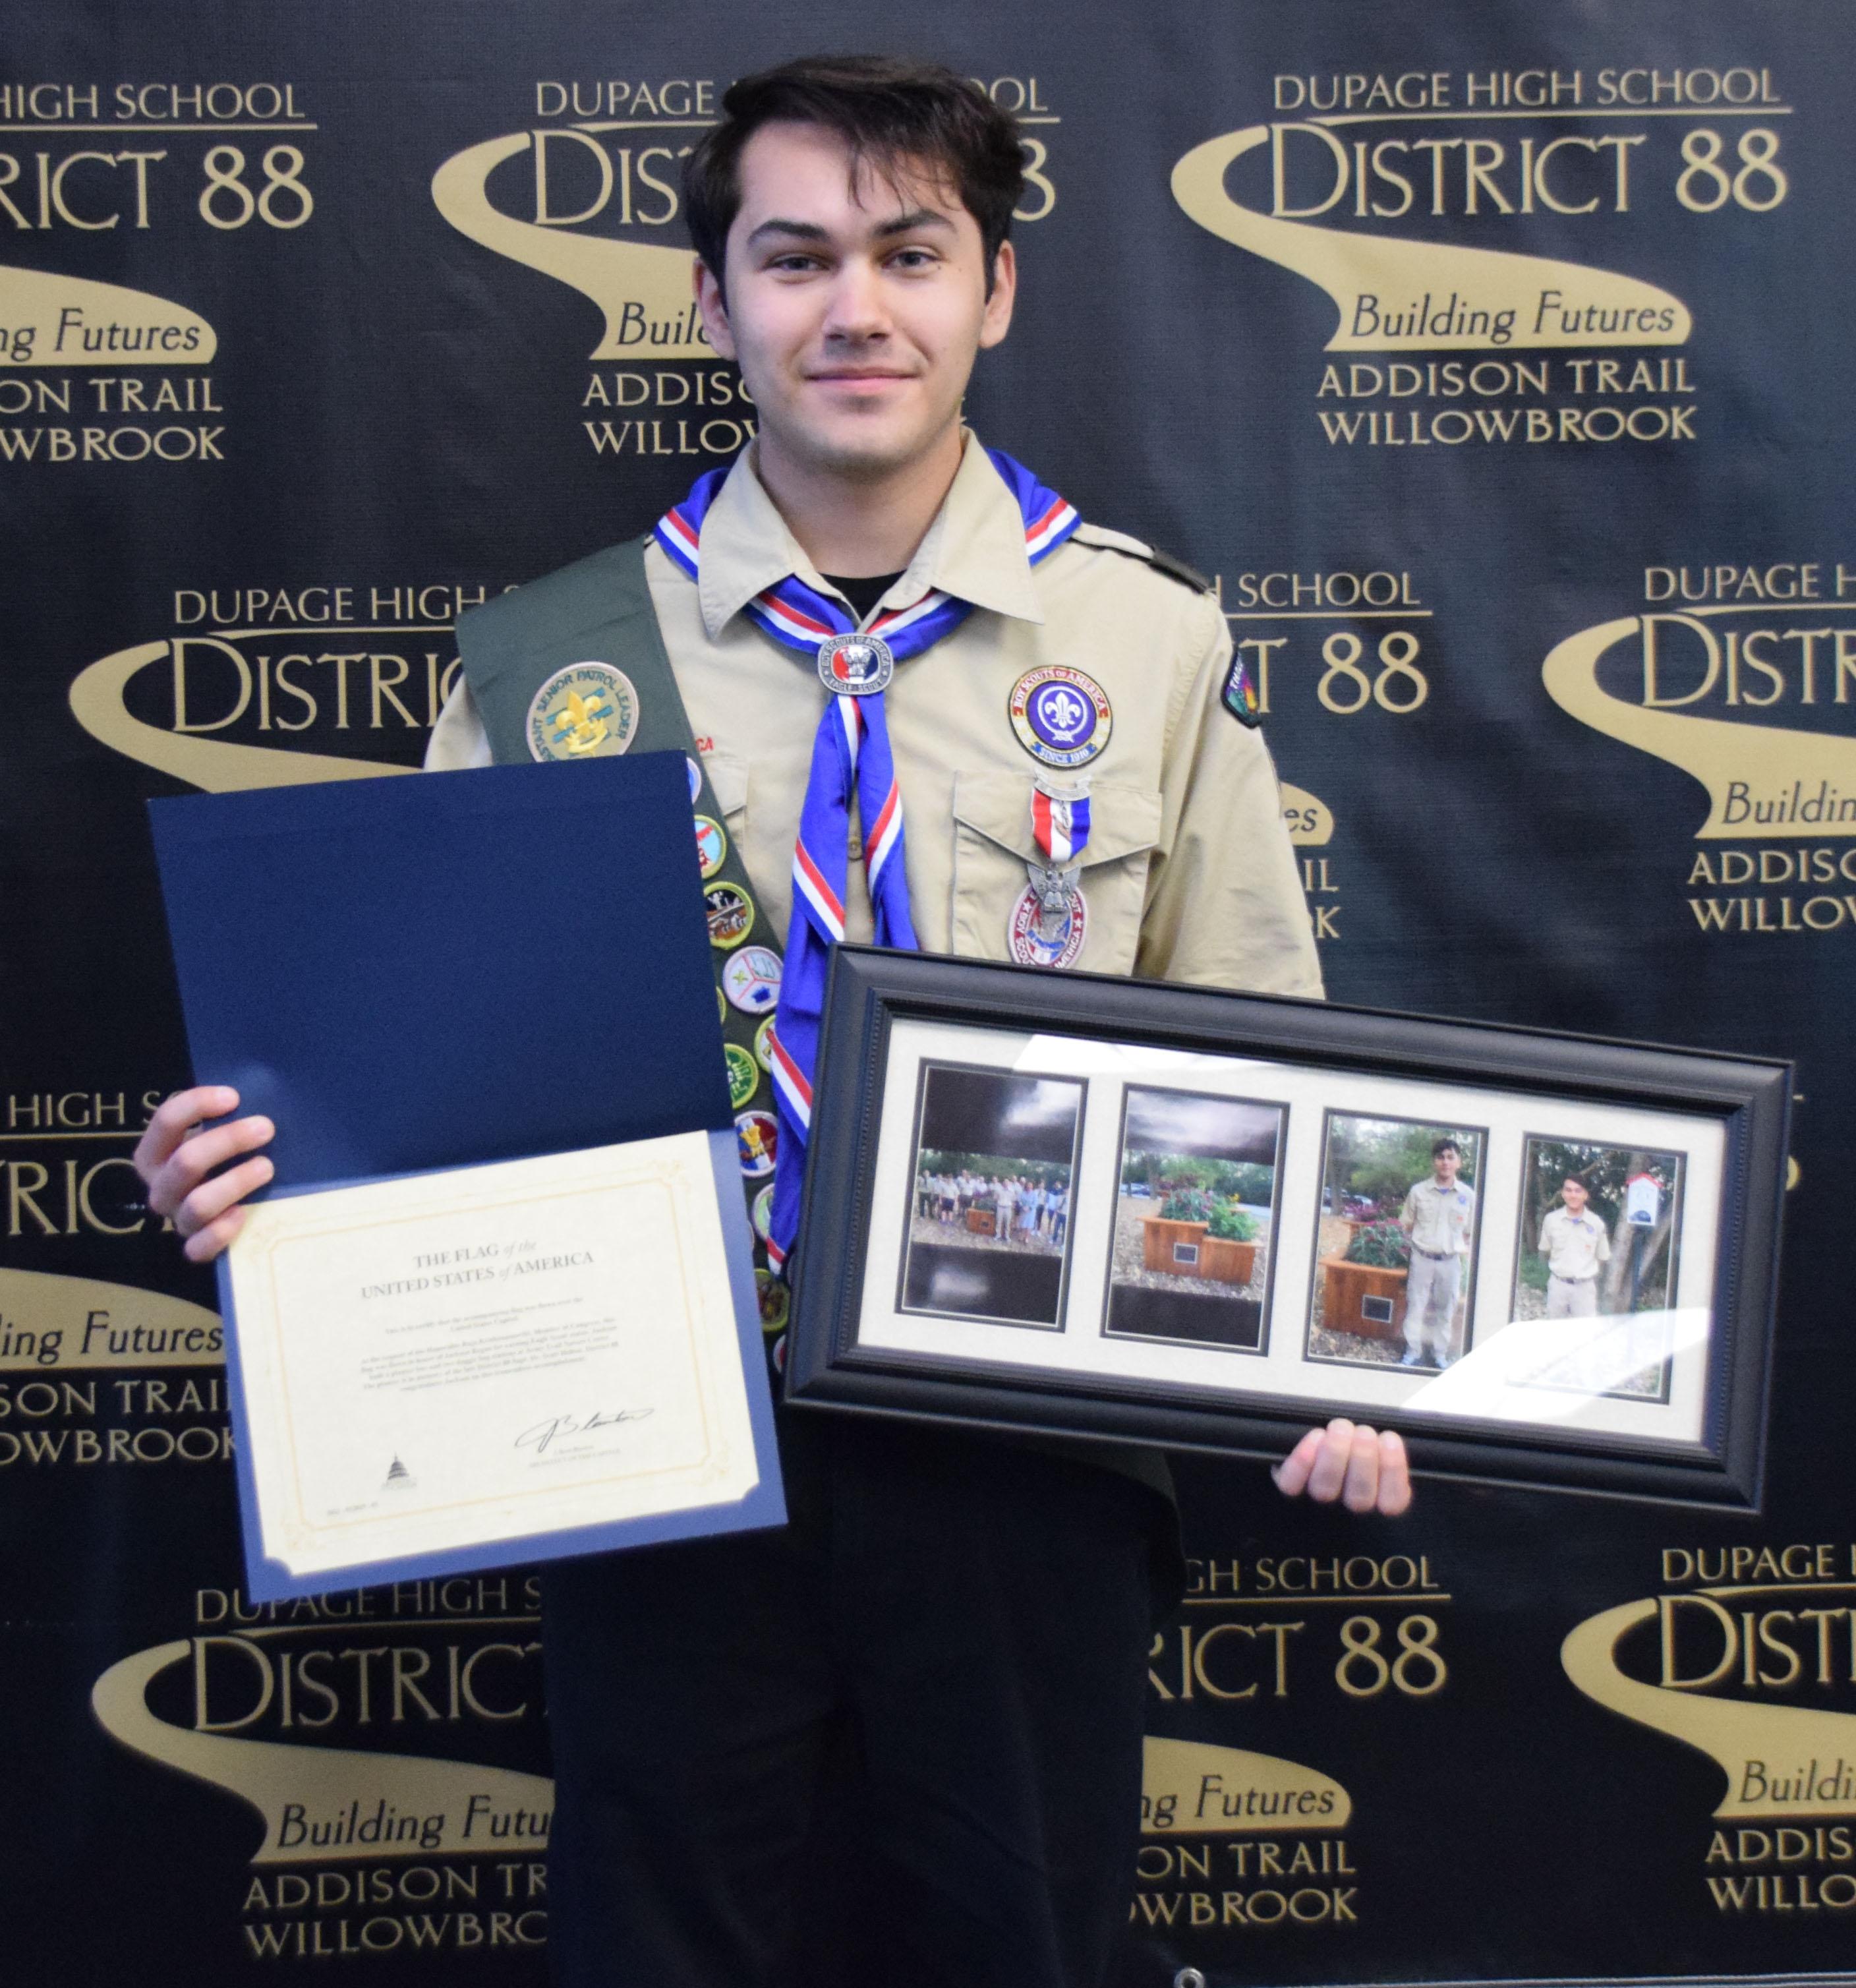 Addison Trail alumnus honored for Eagle Scout project dedicated in memory of the late District 88 Superintendent Dr. Scott Helton